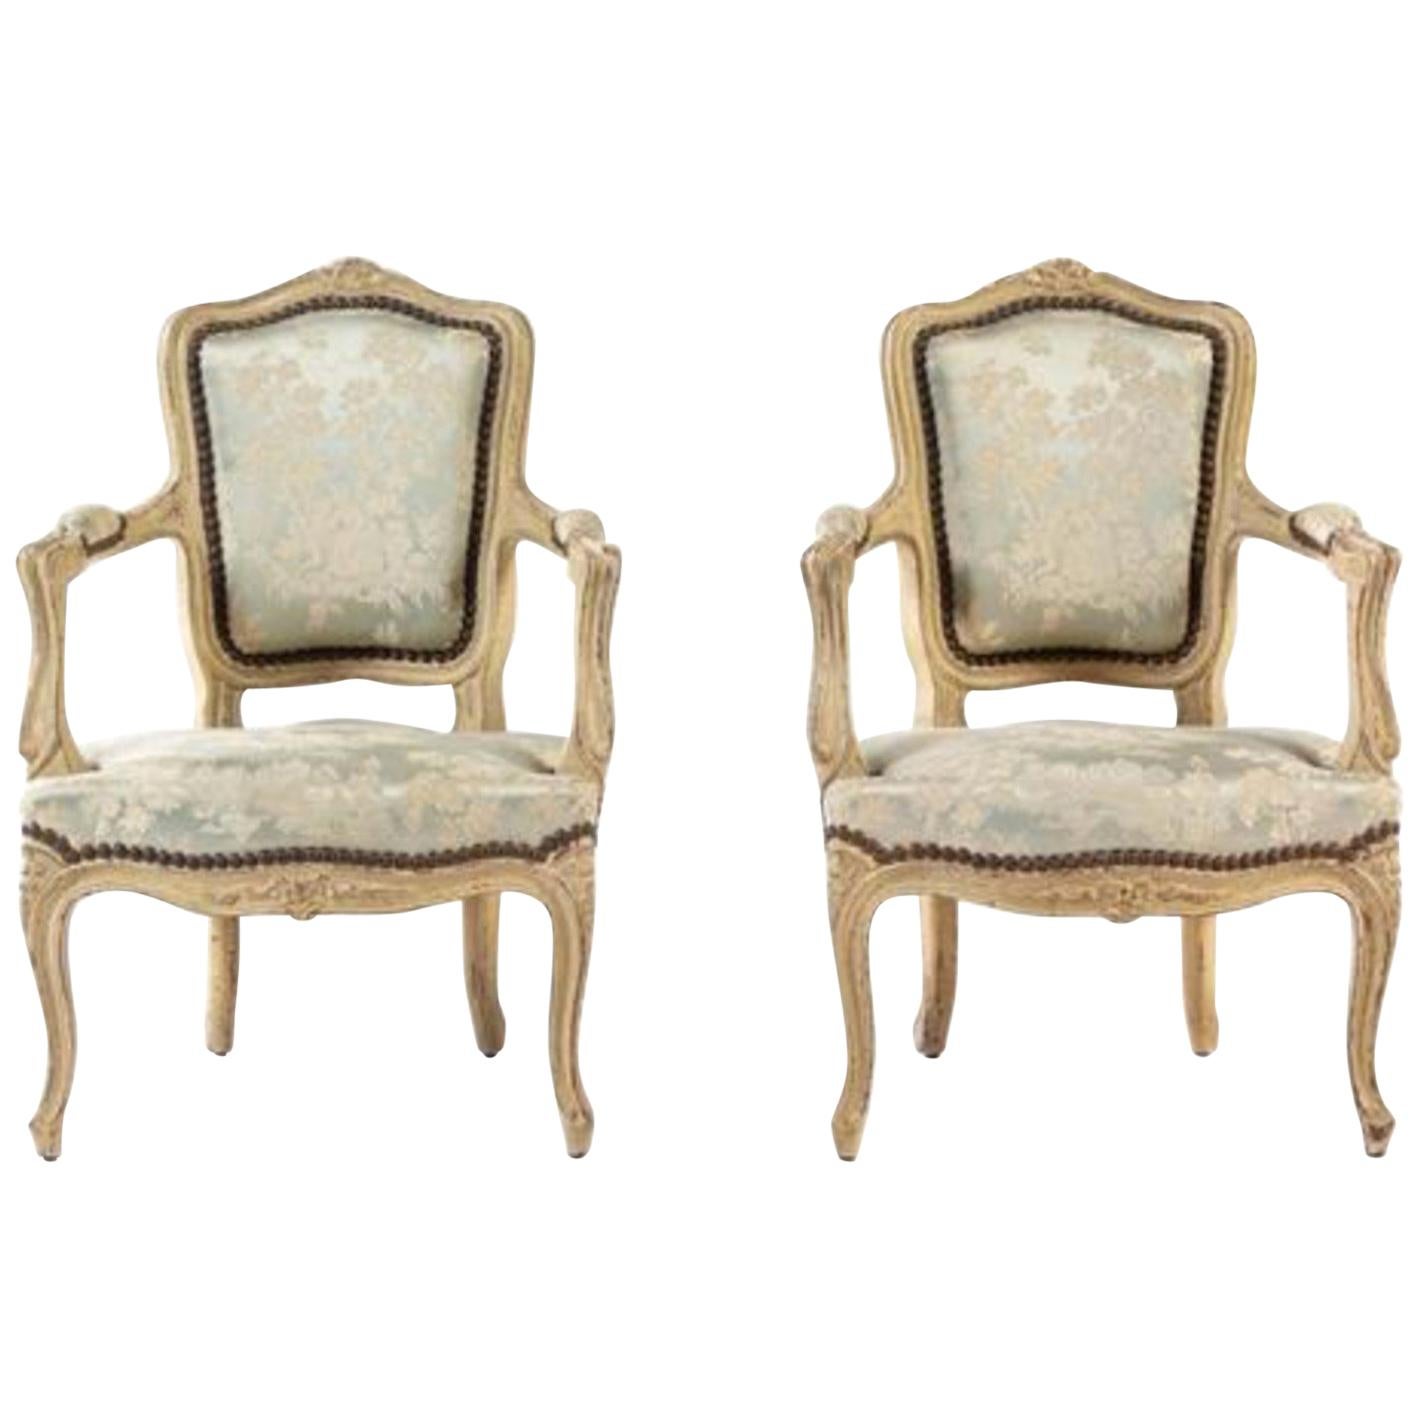 Charming 19th Century Pair of Louis XV Style Painted Child's Chairs Upholstered.